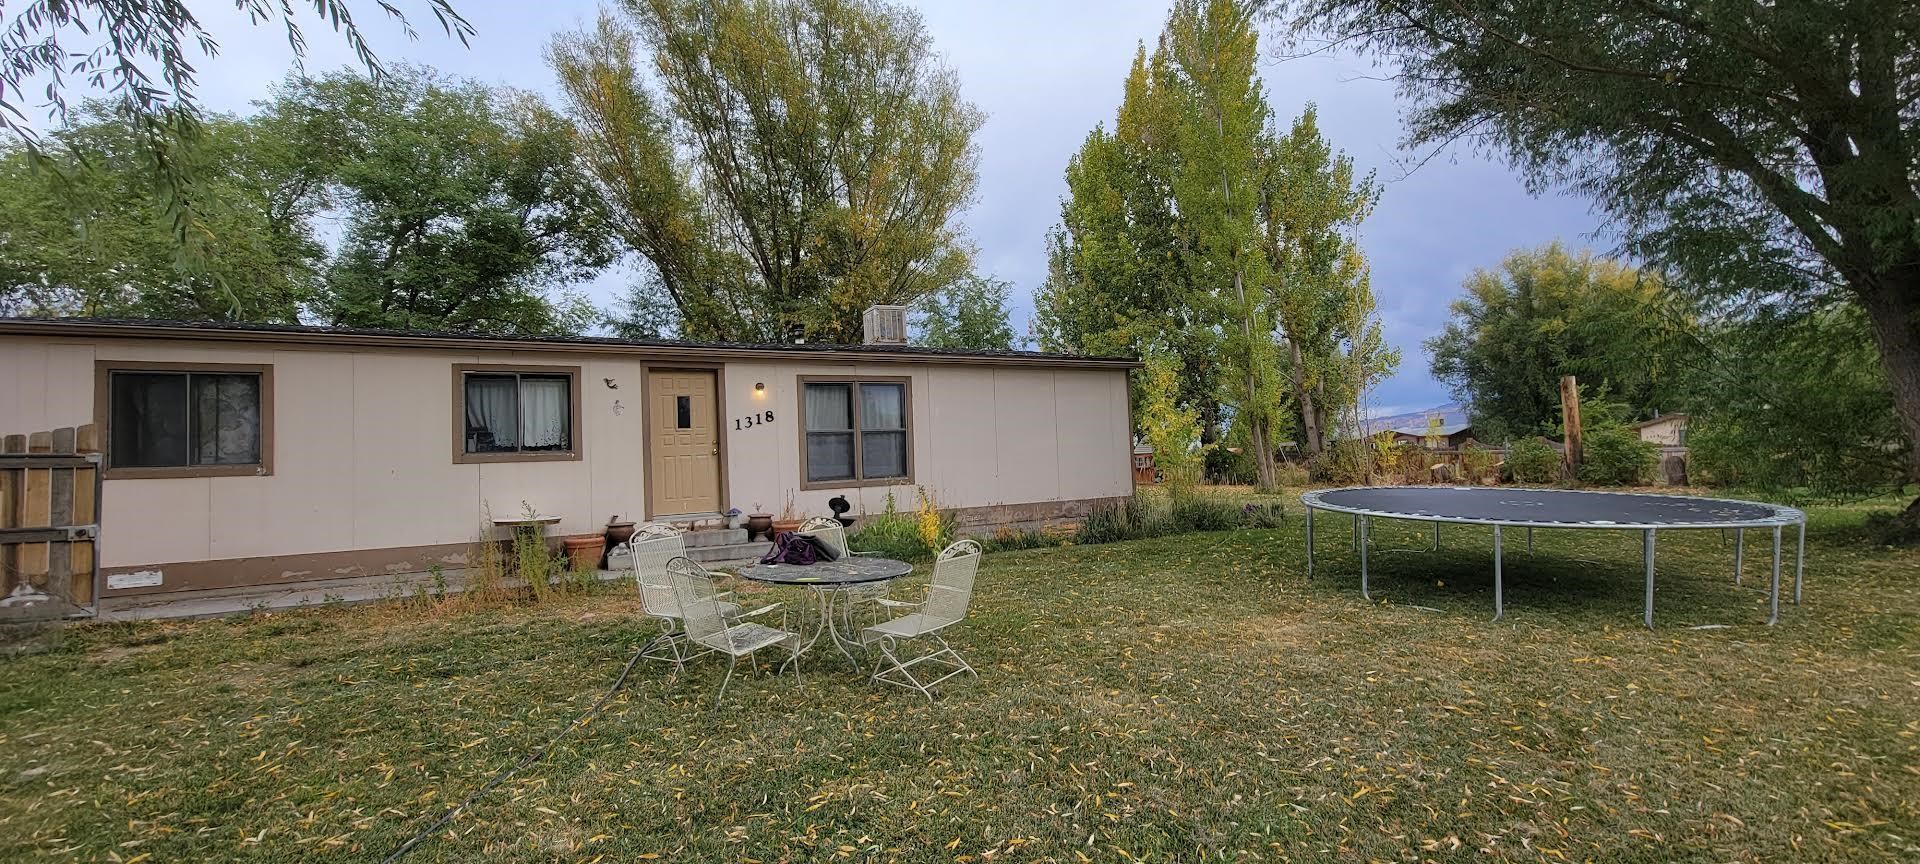 This family home is tucked into a wonderful yard with large trees and  a partial privacy fence.  Inside pictures were not ready.  There is potential here with EXTENSIVE cleanup and deferred maintenance.  Possession date is to be determined by seller agreement.